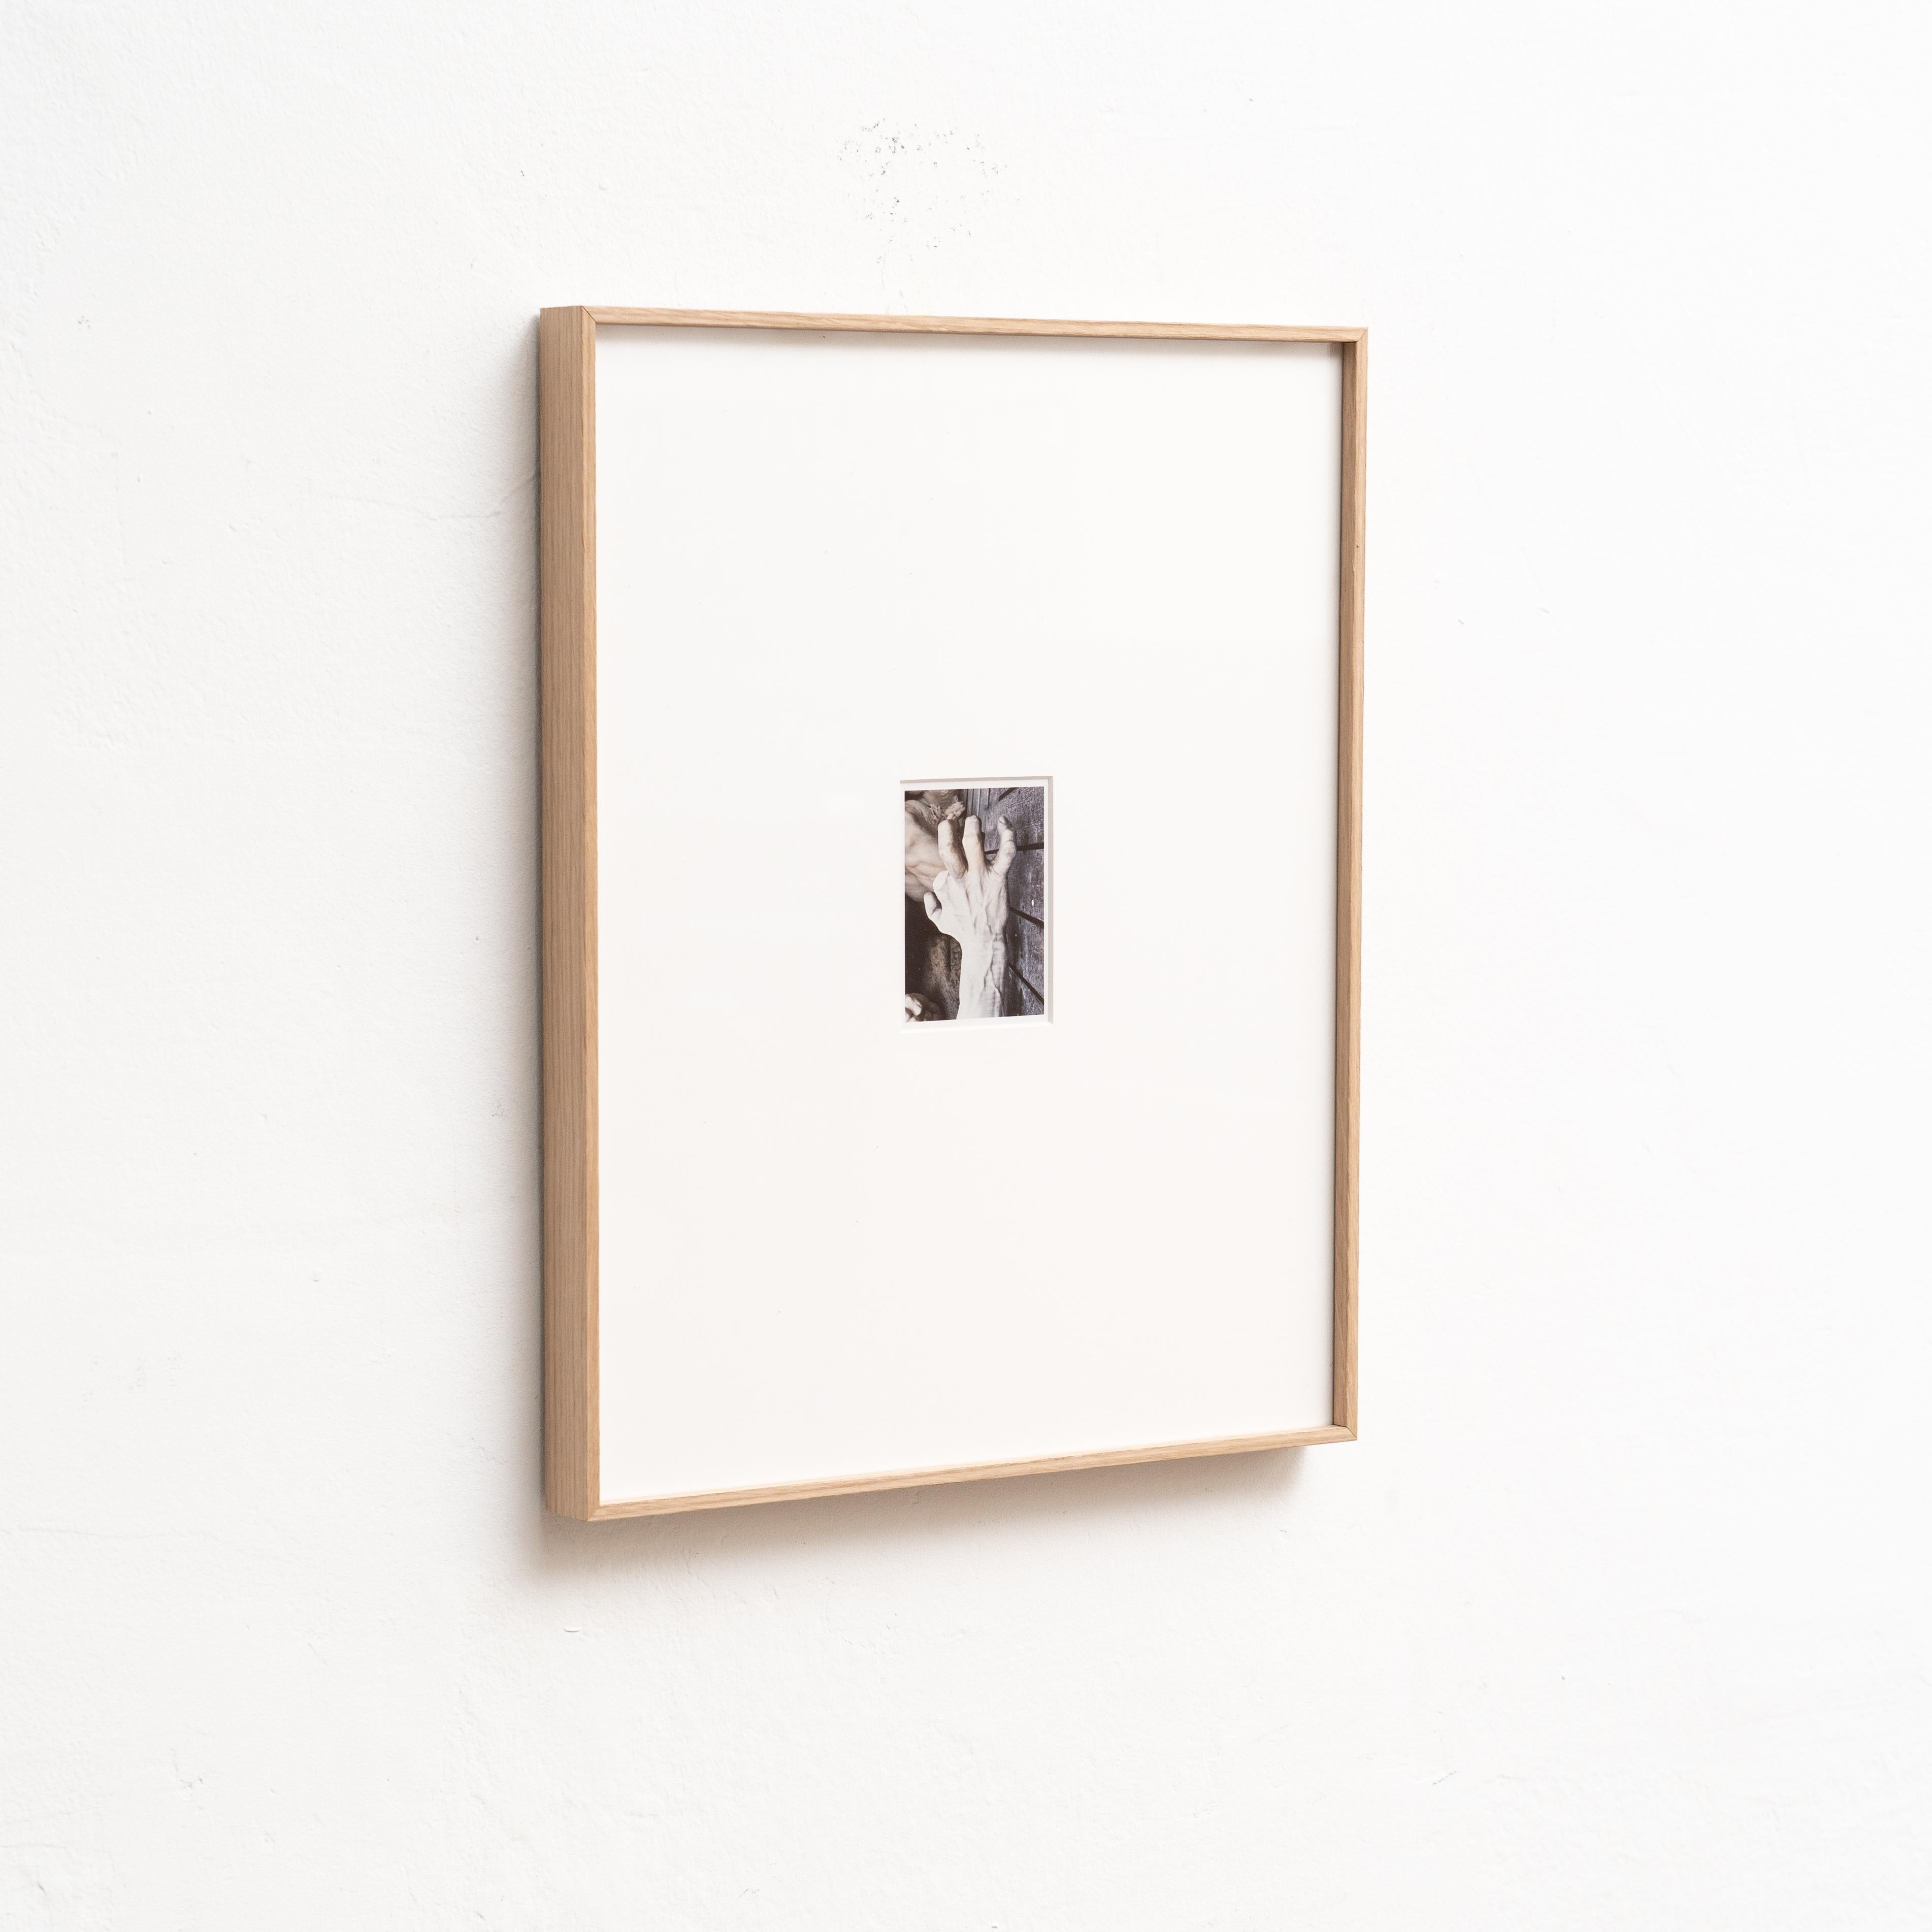 Paper Pascal and Vastian Framed Photography, 2015 For Sale